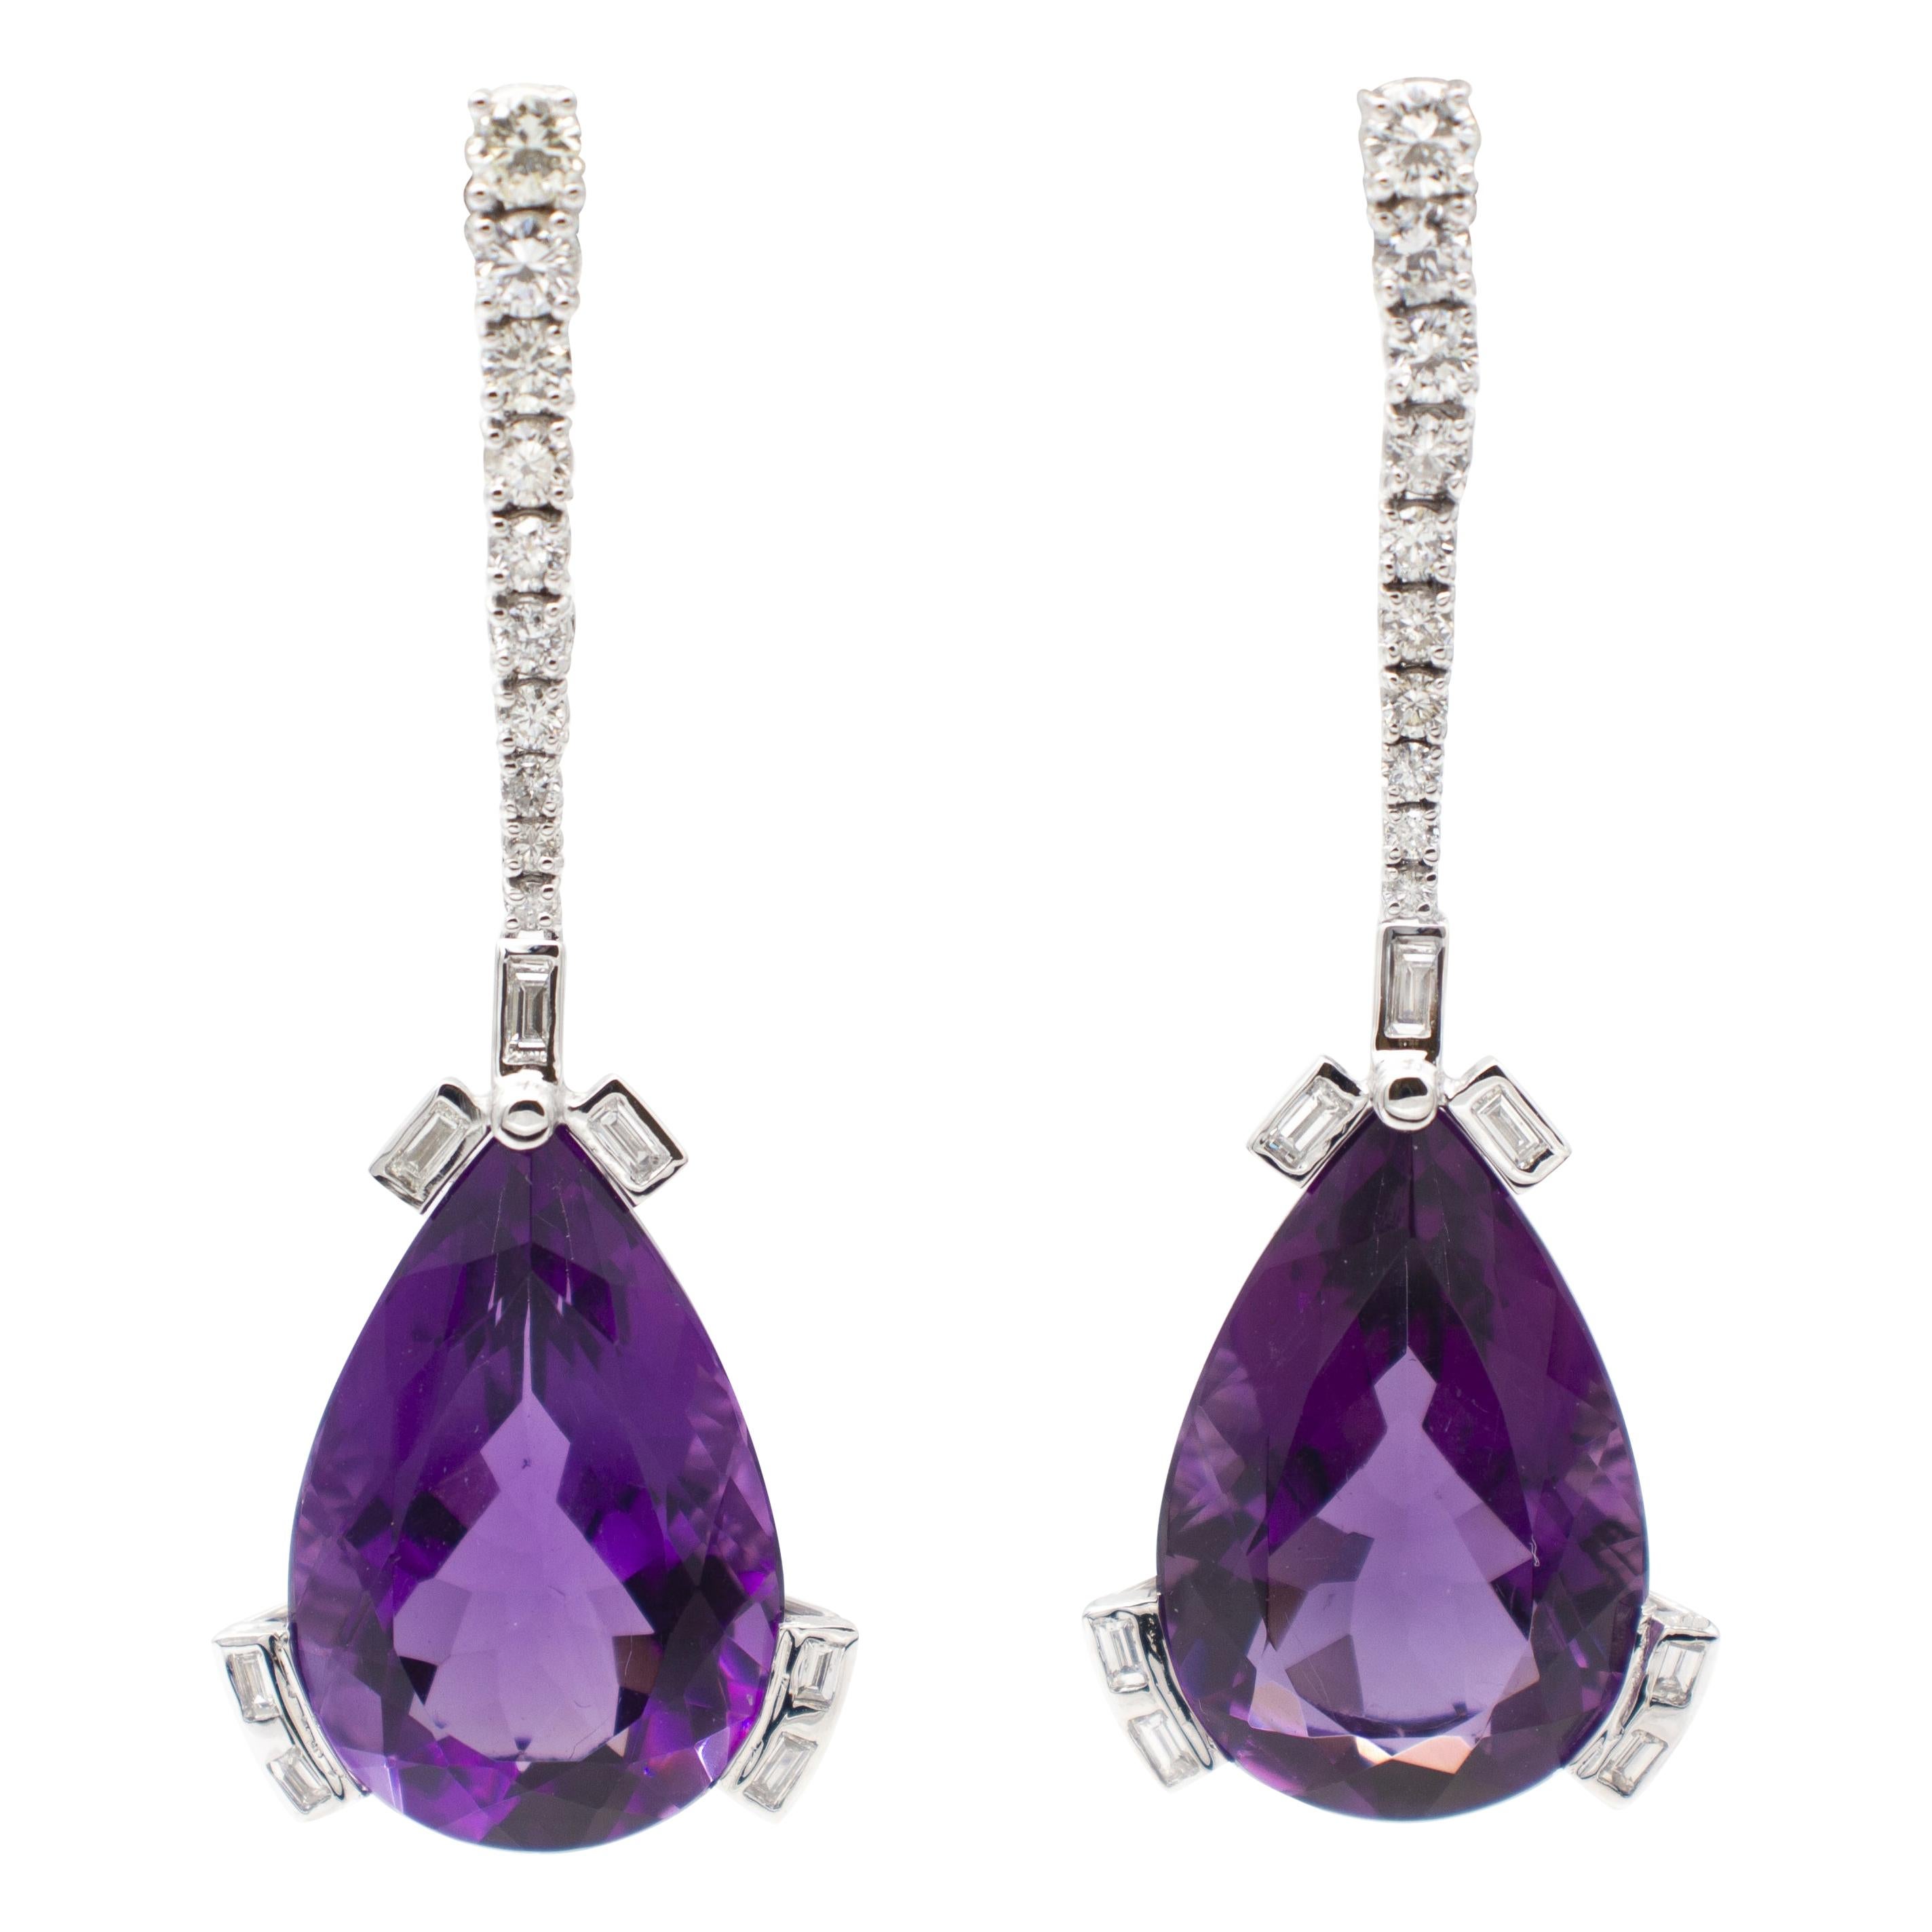 28 ct Drops Amethyst, Round and Emerald Cut Diamonds, 18kt White Gold Earrings